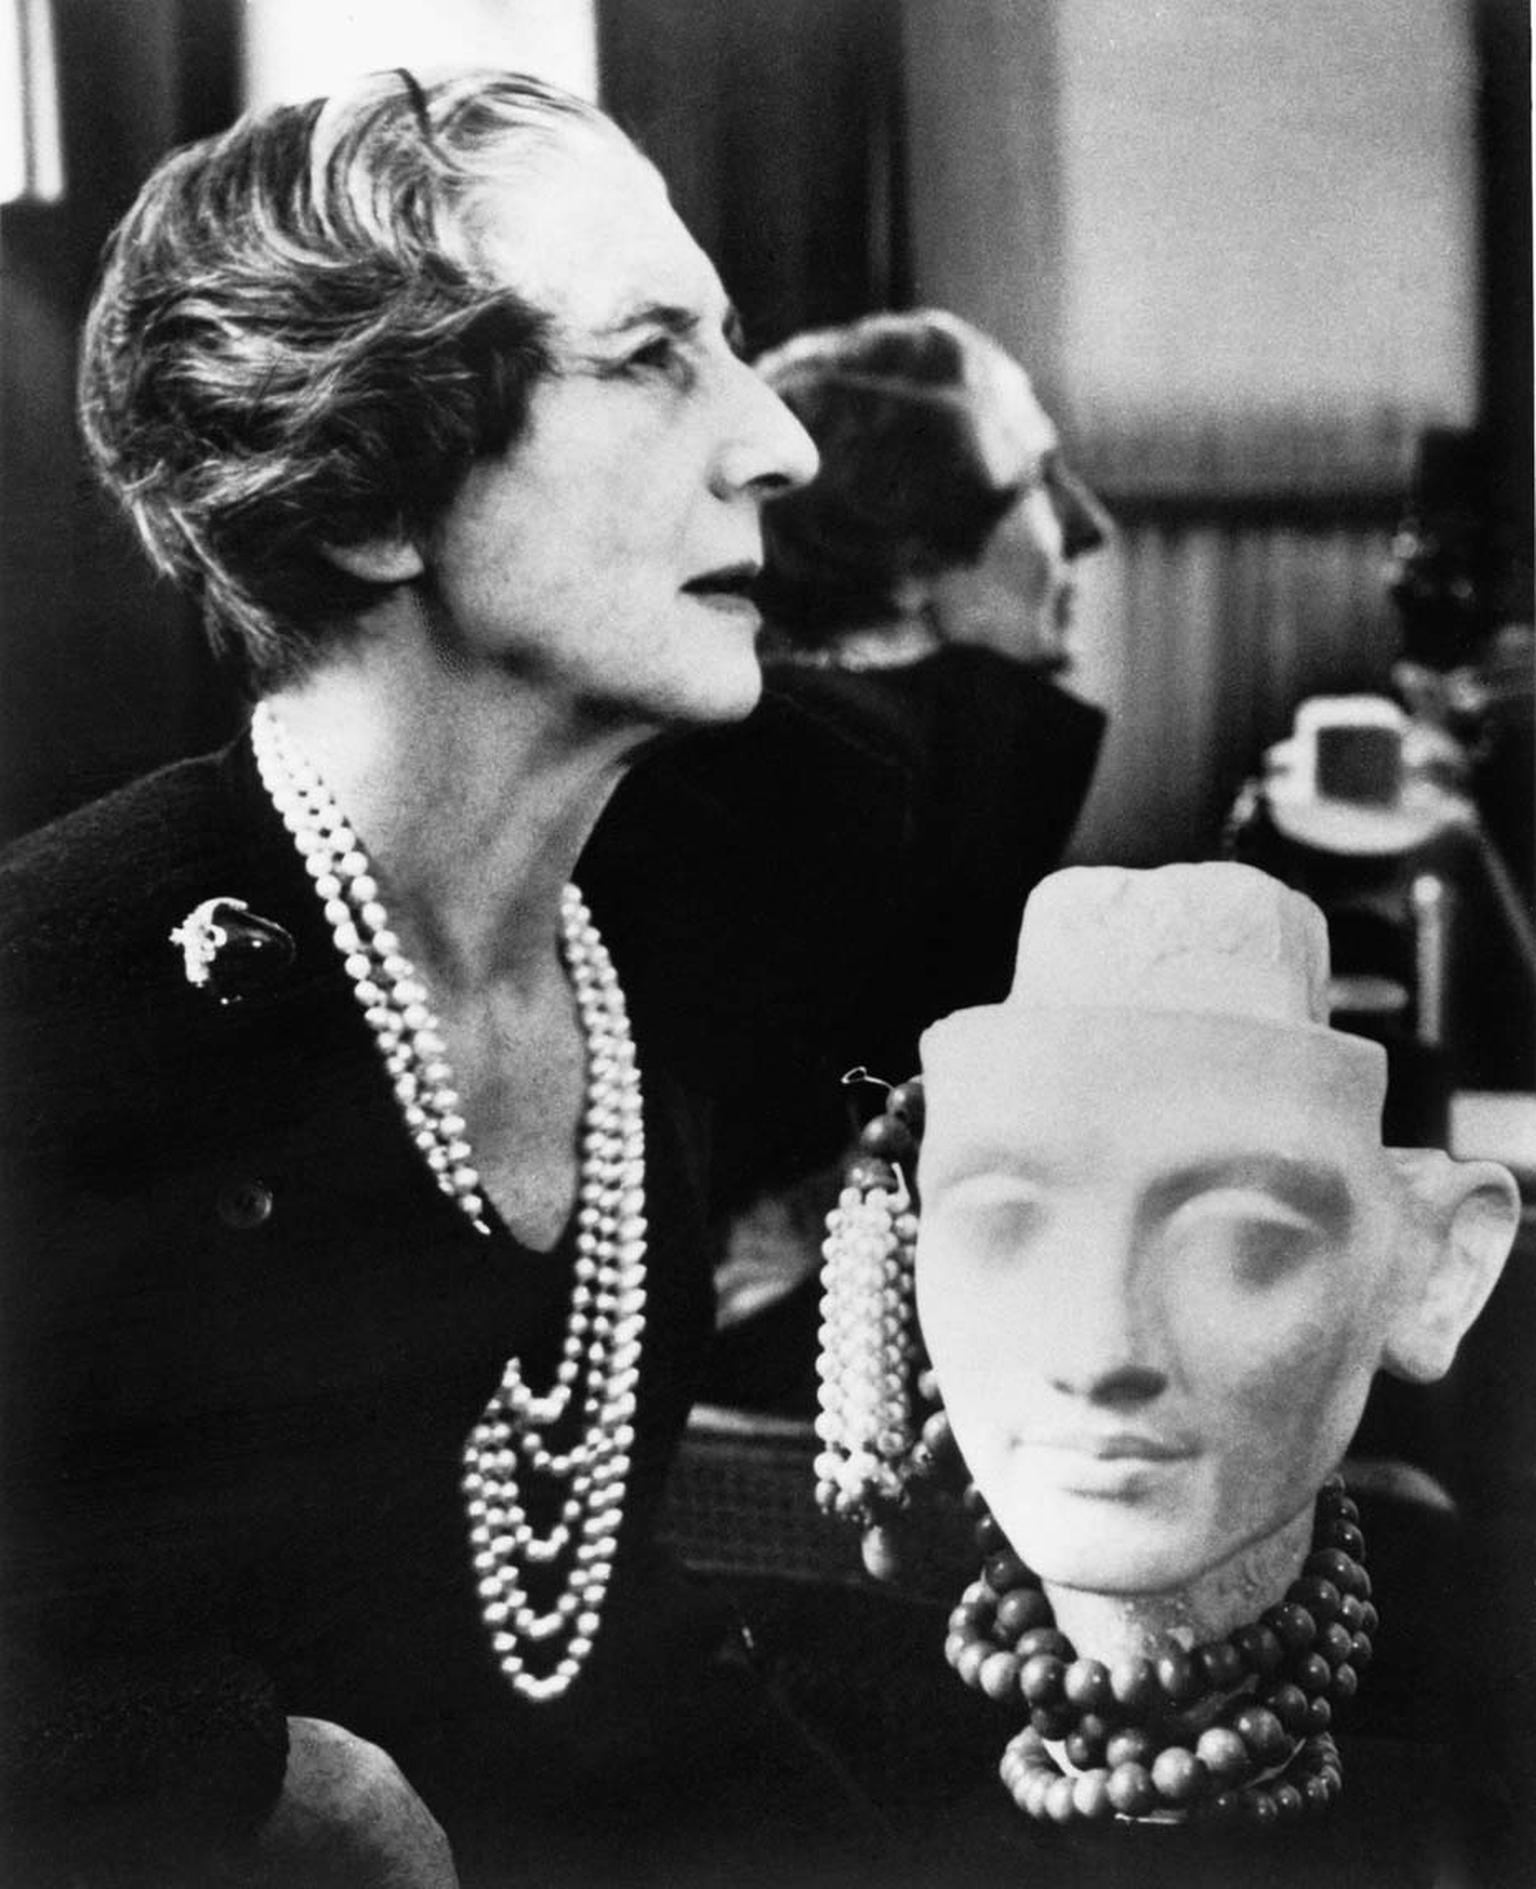 Jeanne Toussaint, Cartier's Artistic Director of Jewellery, is remembered as a visionary with great taste and character. She was both the muse and the driving force of Cartier style in the 20th century.